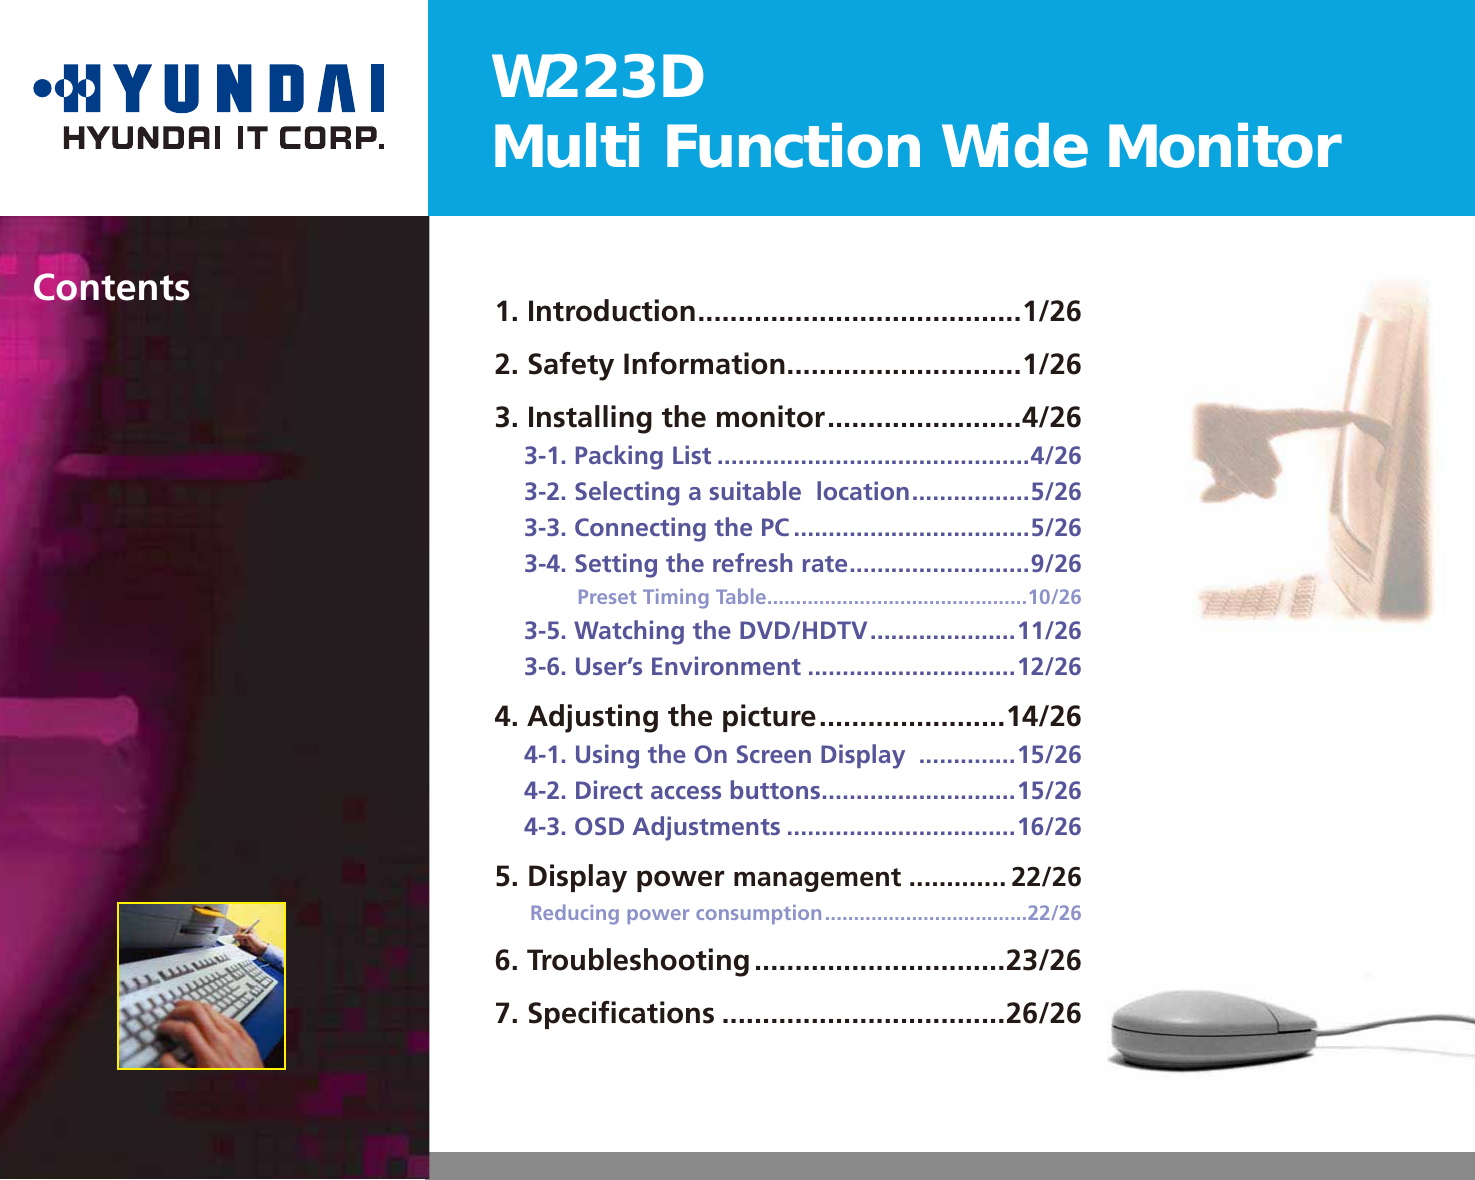 W223DMulti Function Wide Monitor1. Introduction ........................................1/262. Safety Information .............................1/263. Installing the monitor ........................4/263-1. Packing List .............................................4/263-2. Selecting a suitable  location .................5/263-3. Connecting the PC ..................................5/263-4. Setting the refresh rate ..........................9/26Preset Timing Table .............................................10/263-5. Watching the DVD/HDTV .....................11/263-6. User’s Environment ..............................12/264. Adjusting the picture .......................14/264-1. Using the On Screen Display  ..............15/264-2. Direct access buttons ............................15/264-3. OSD Adjustments .................................16/265. Display power management ............. 22/26Reducing power consumption ...................................22/266. Troubleshooting ...............................23/267. Speciﬁcations ...................................26/26Contents